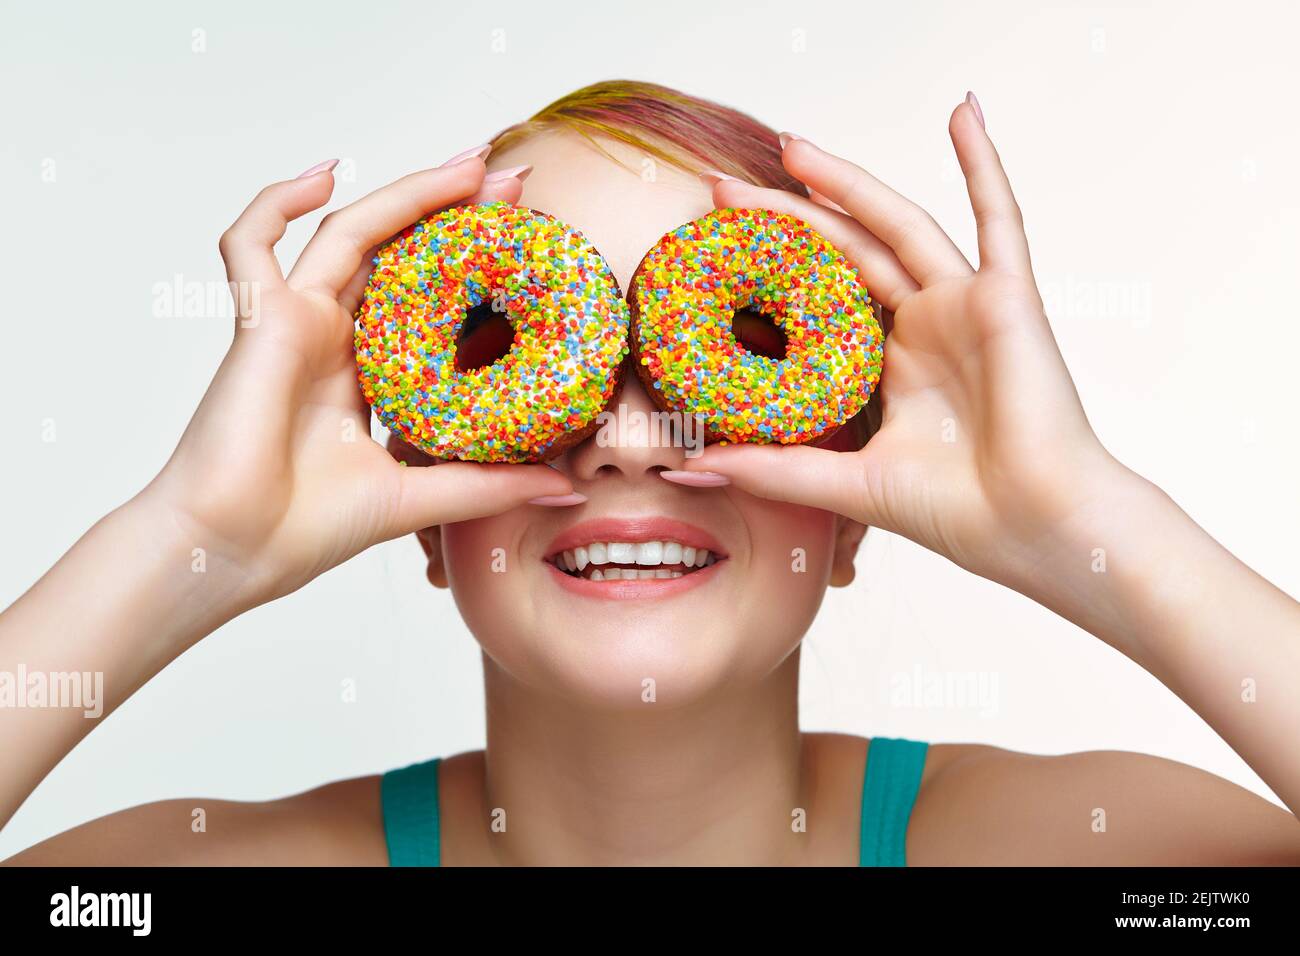 Teenager girl with unusual face art make-up . Child with donuts in hands closing eyes and looking through holes in donuts and smiling. Sweet tooth con Stock Photo